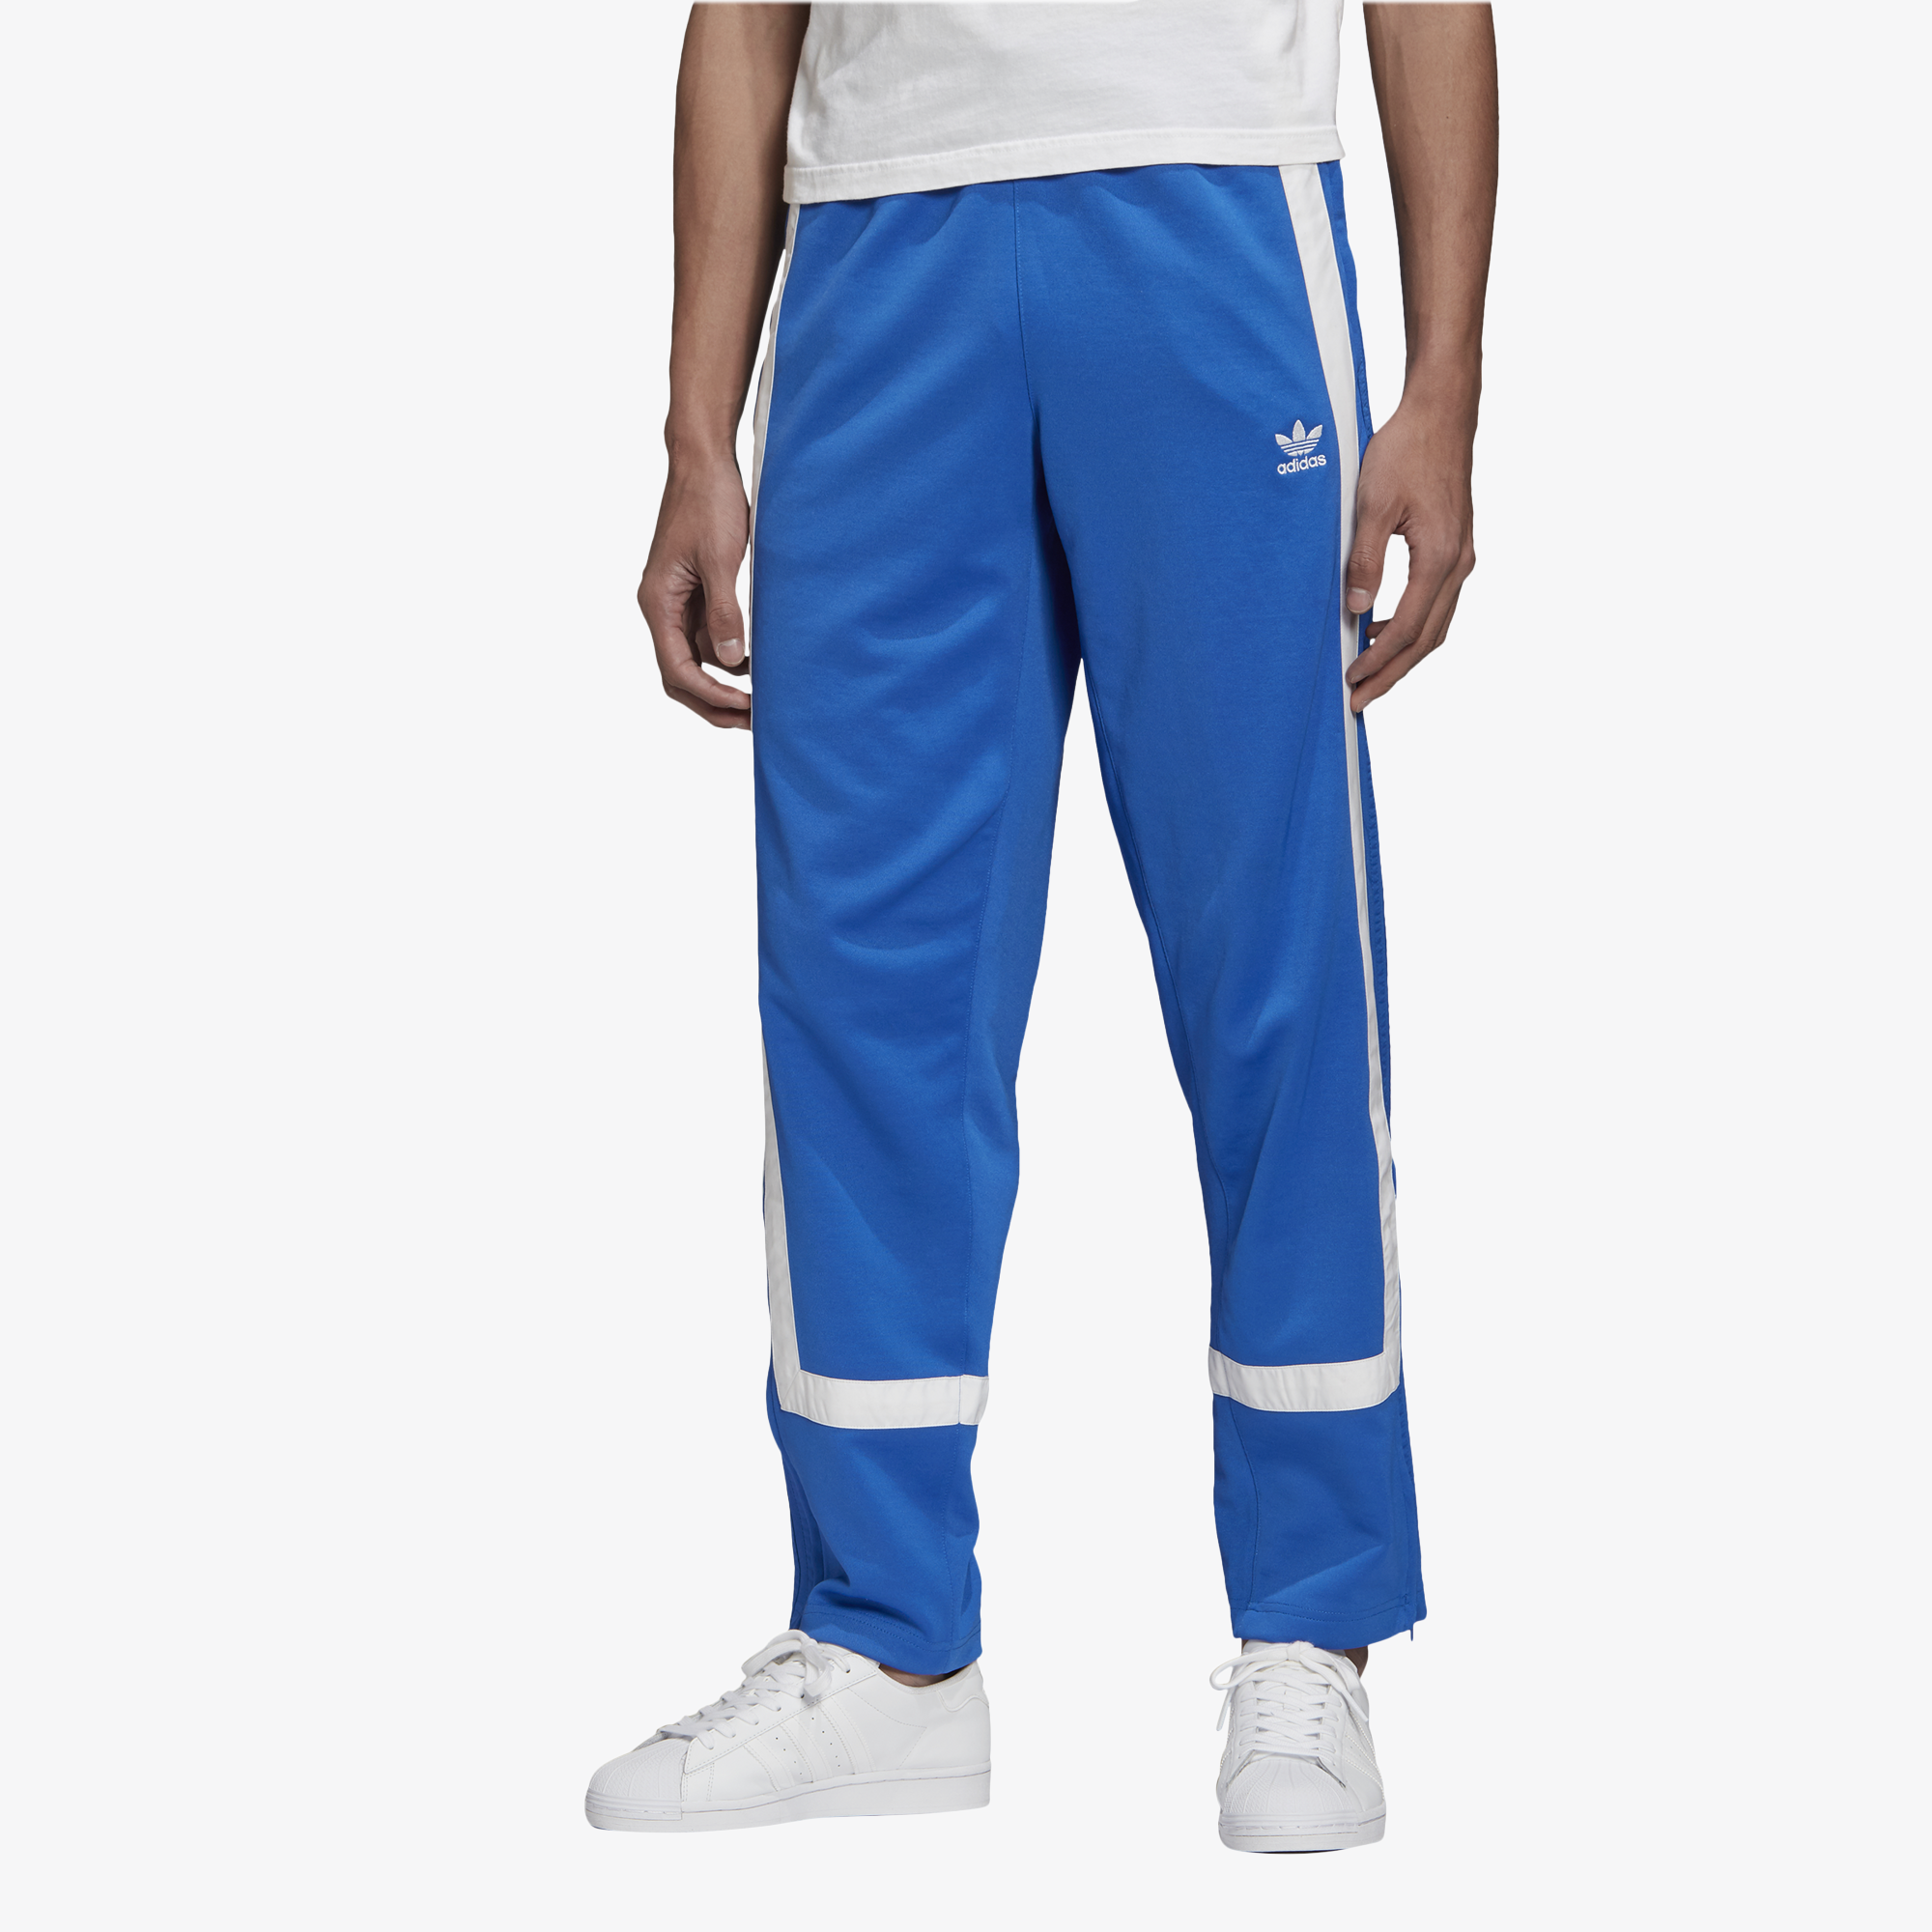 white and gold adidas tracksuit